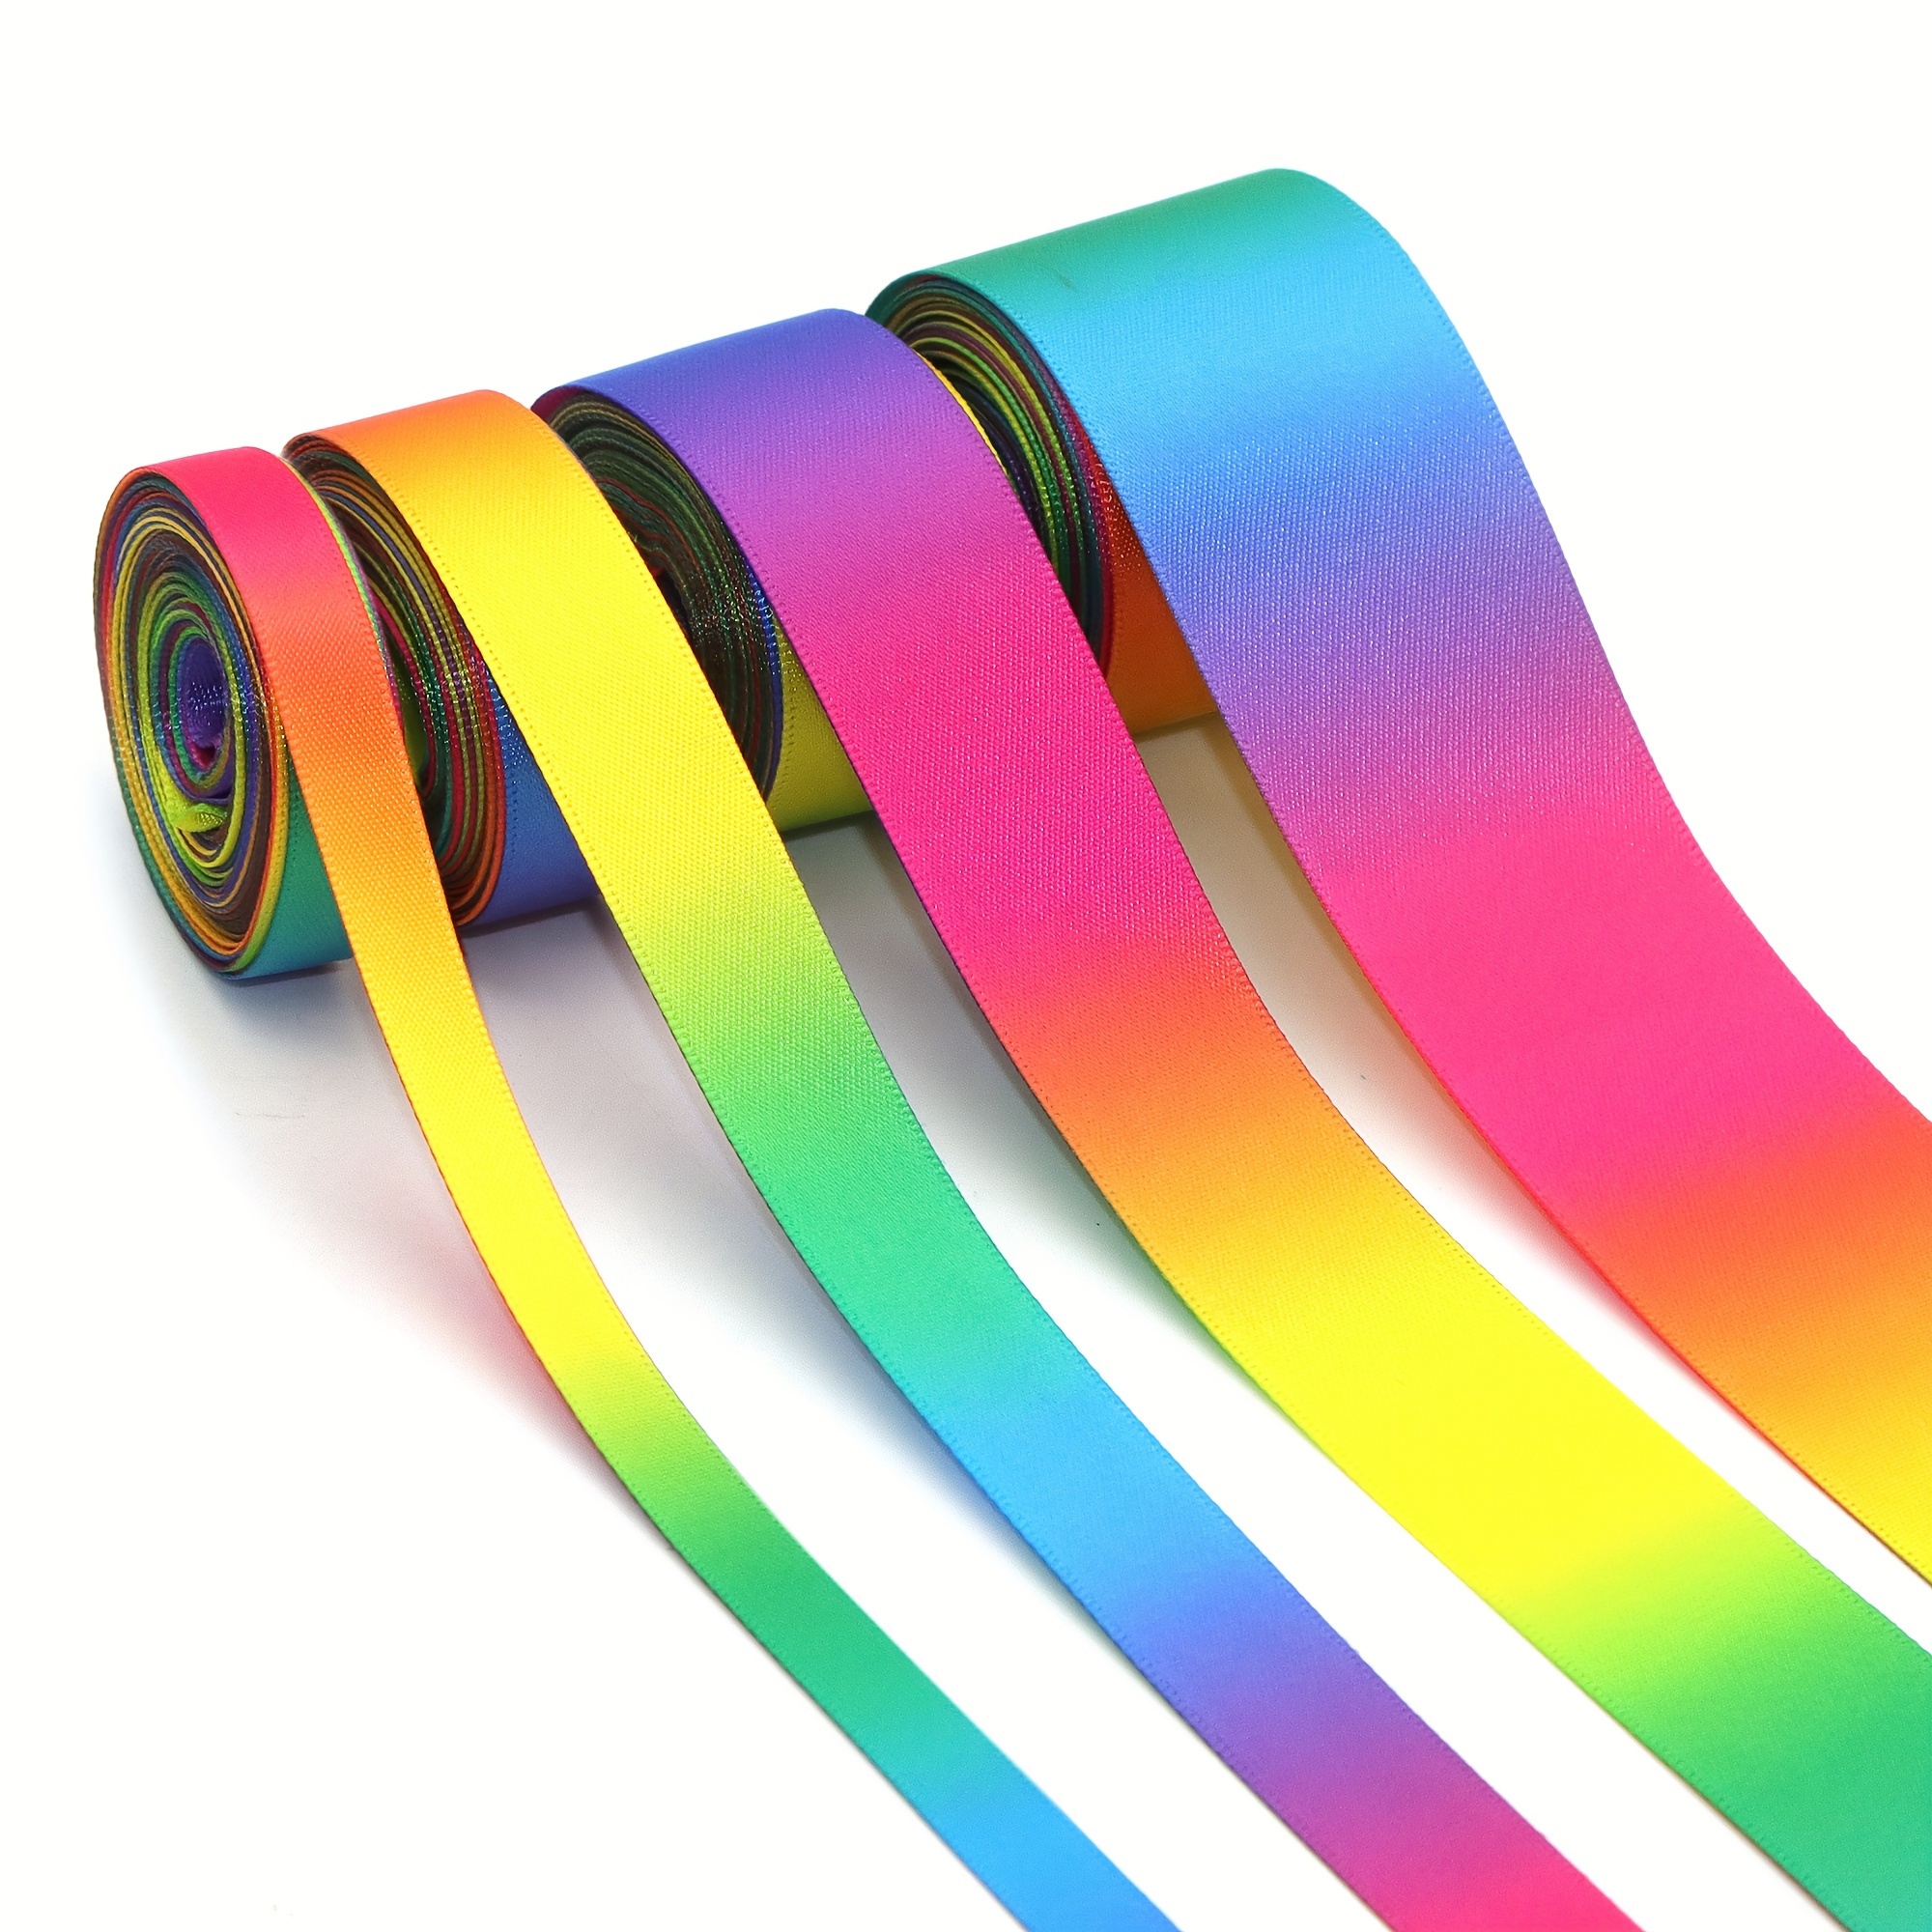 

1 Roll 5 Yards Multisize Double Sided Satin Ribbon Gradient Color Rainbow Ribbon For Diy Hair Bows Gift Wrap Christmas Wedding Party Decor Projects